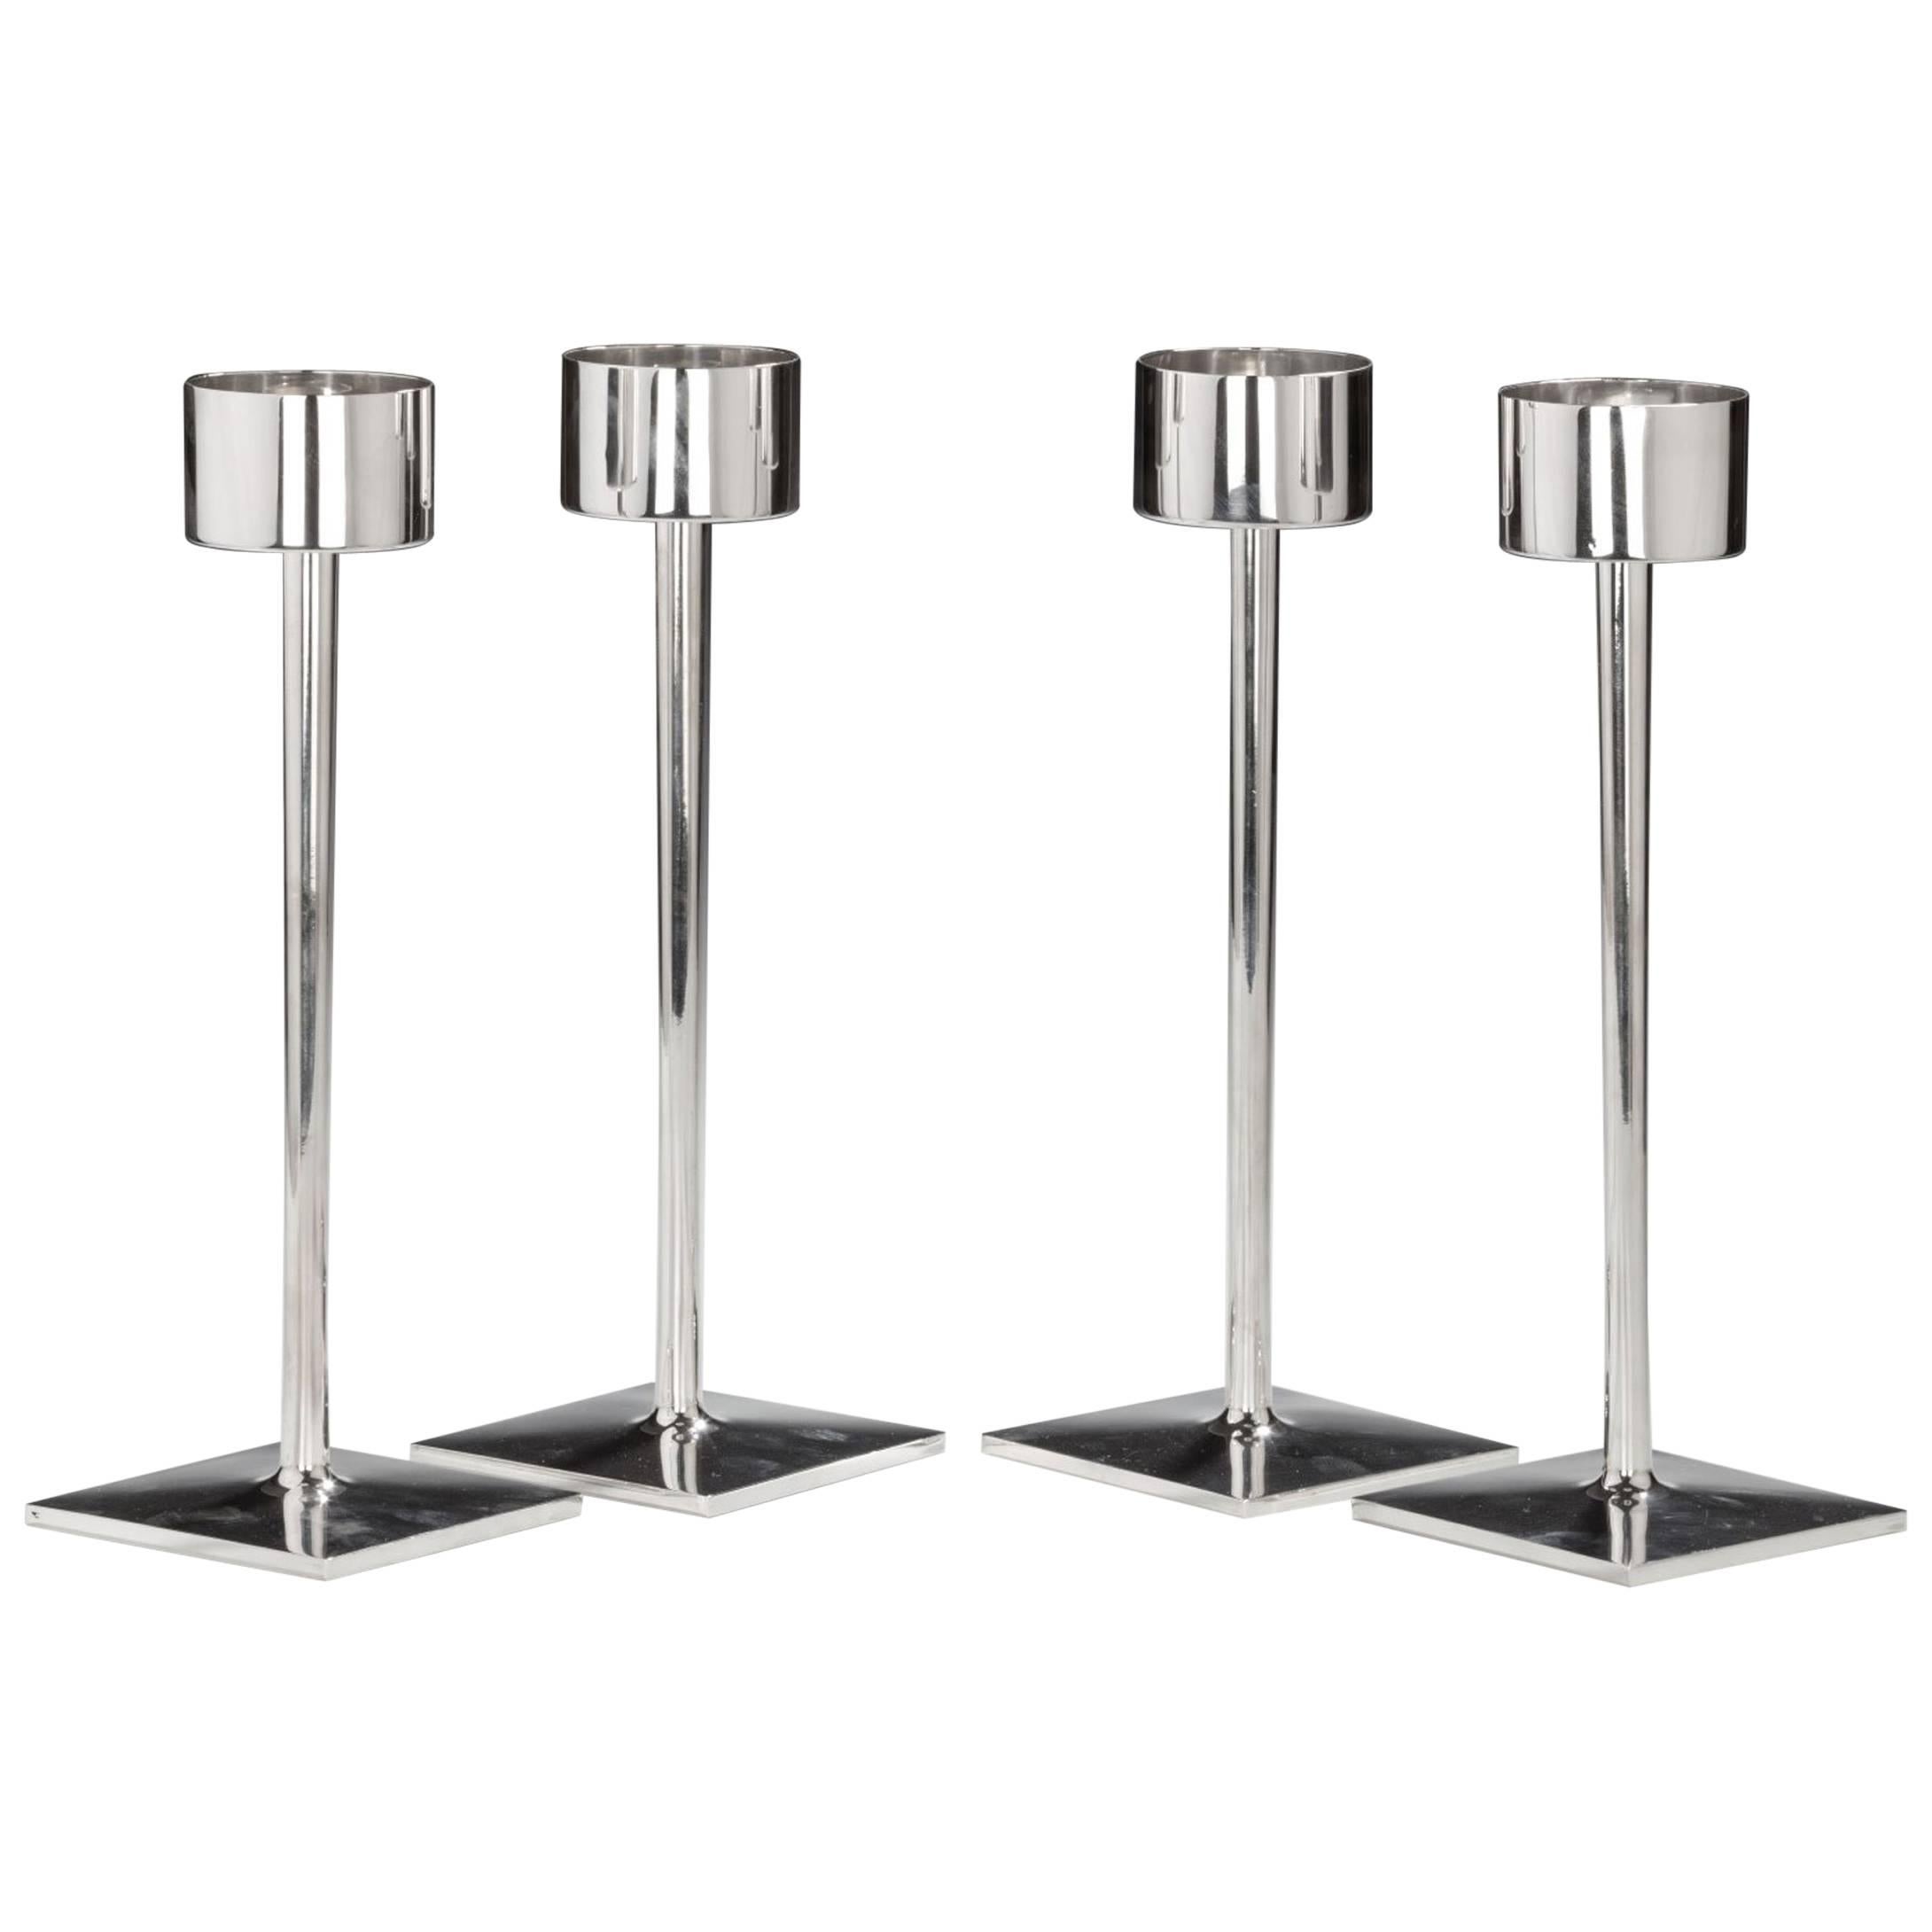 Set of Four Silver Candlesticks by Alex Styles